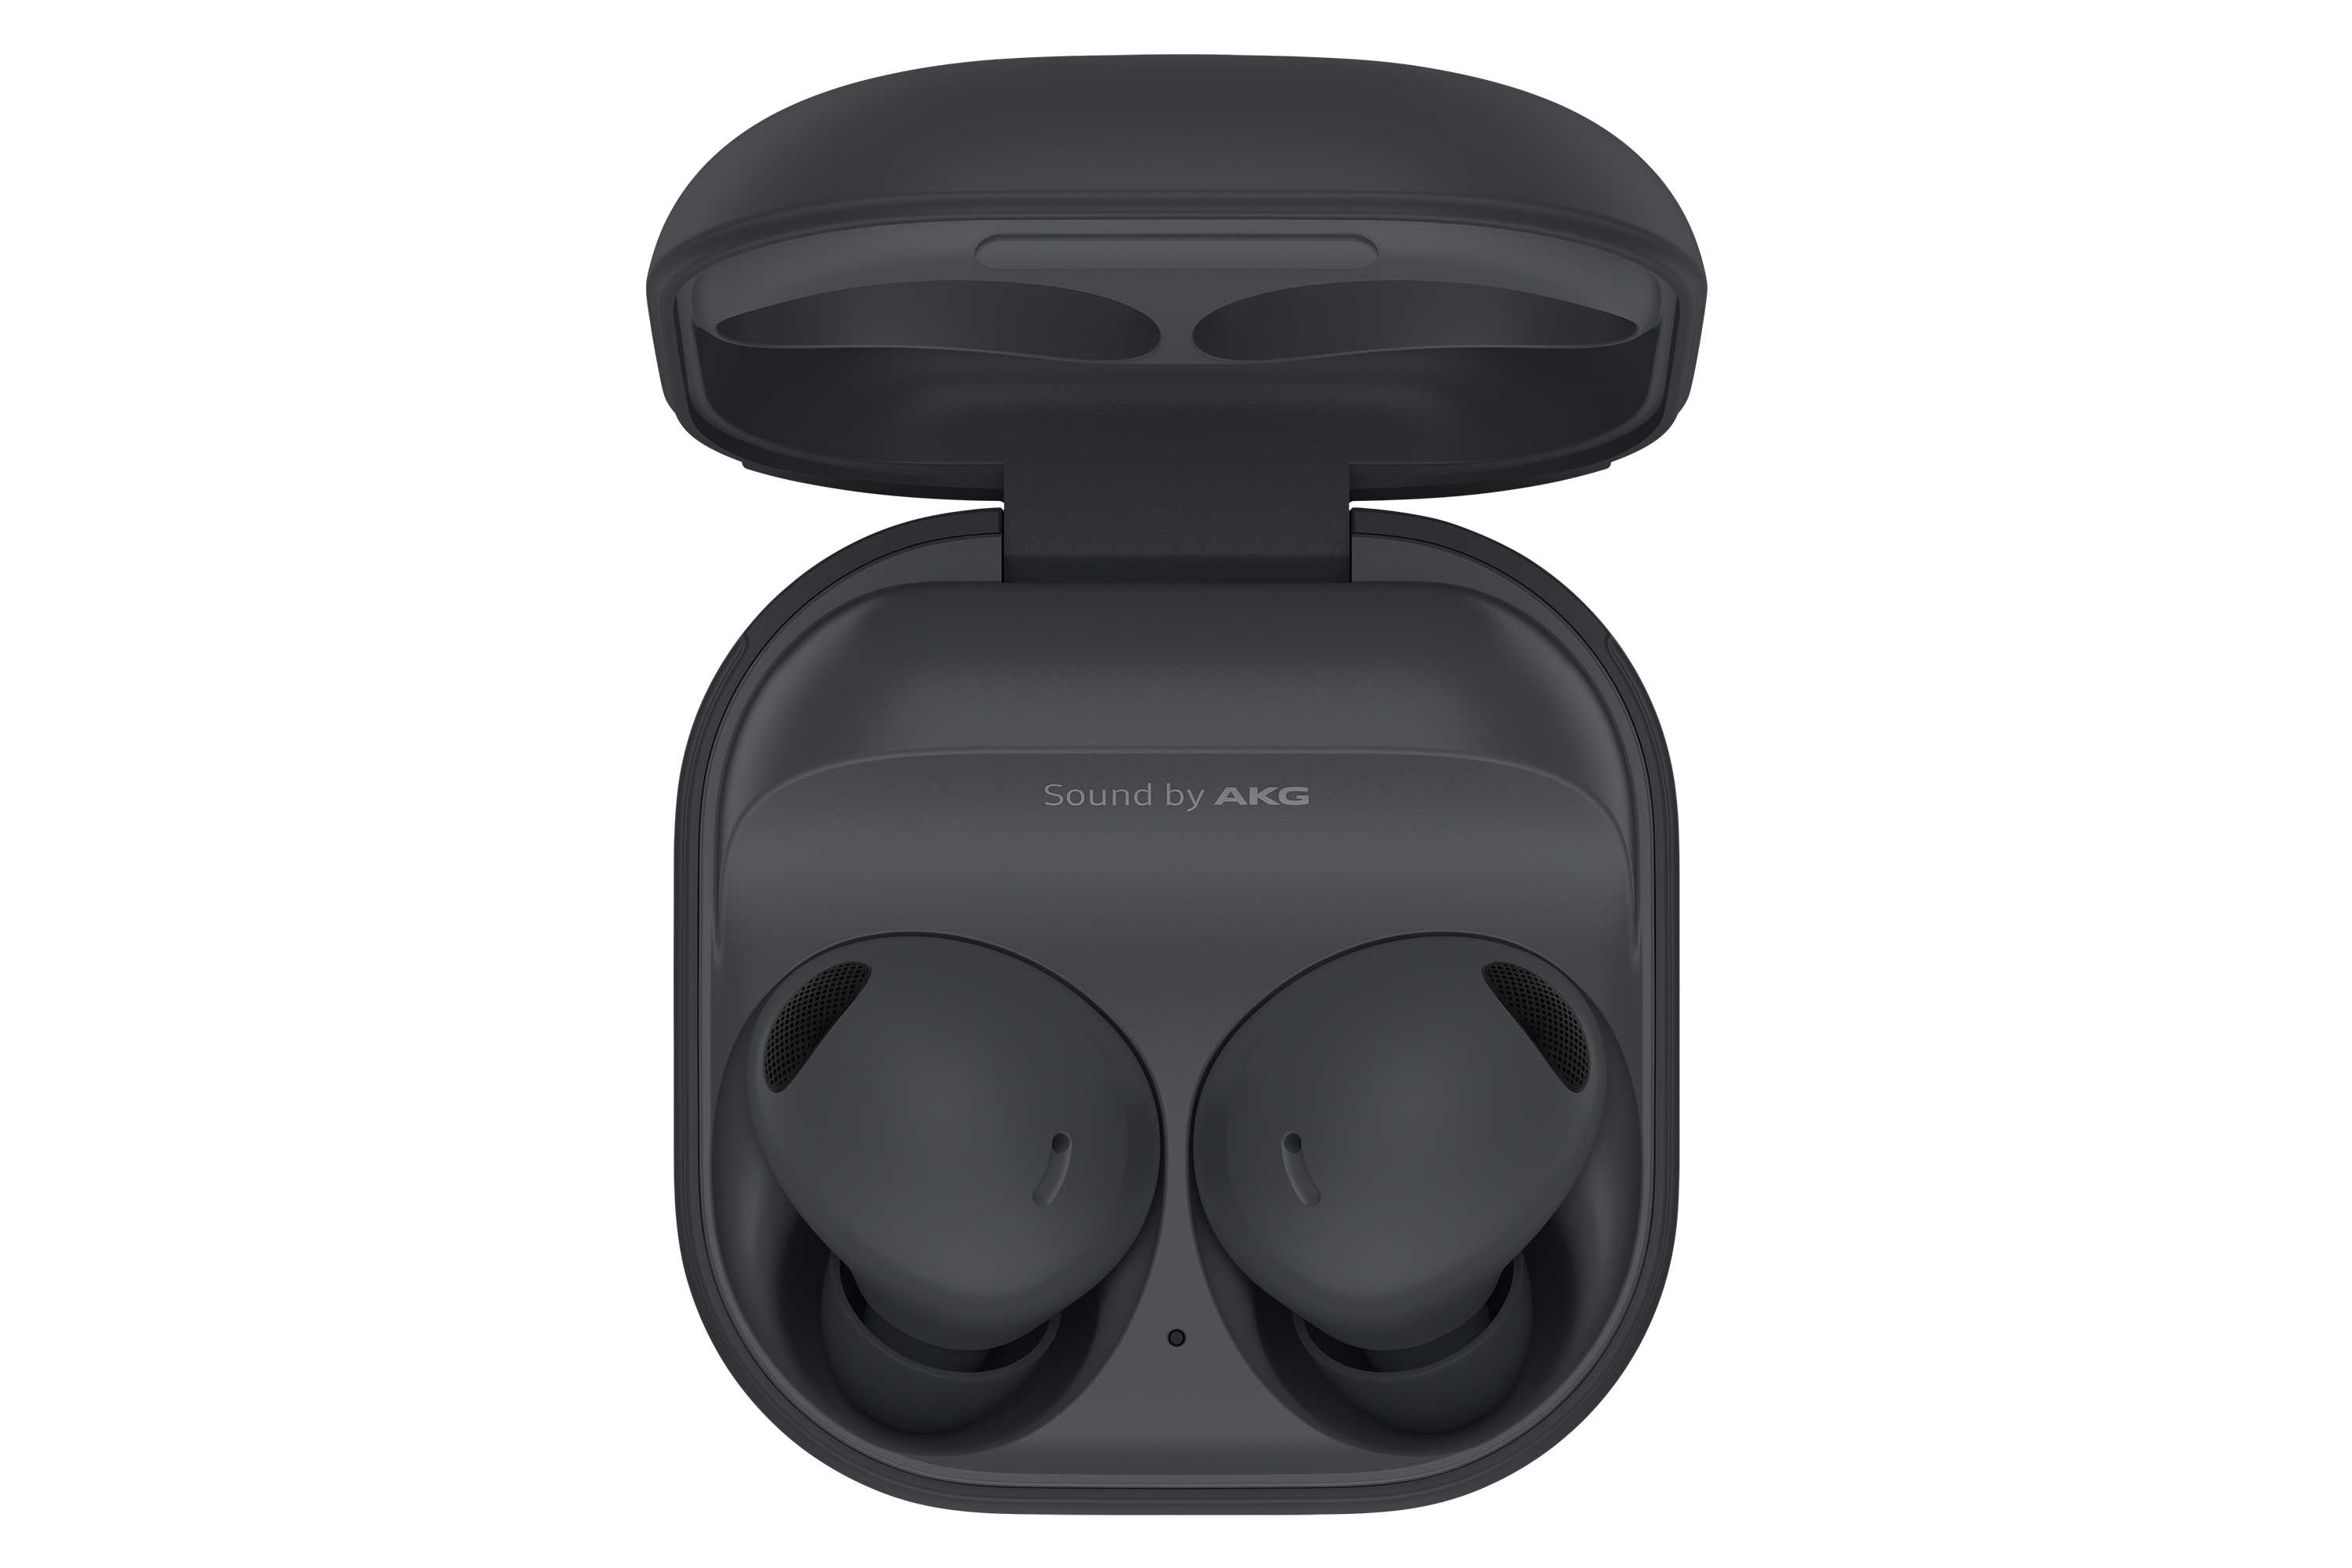 Buy a Galaxy S23 Ultra and receive a free pair of Galaxy Buds2 Pro with your purchase.